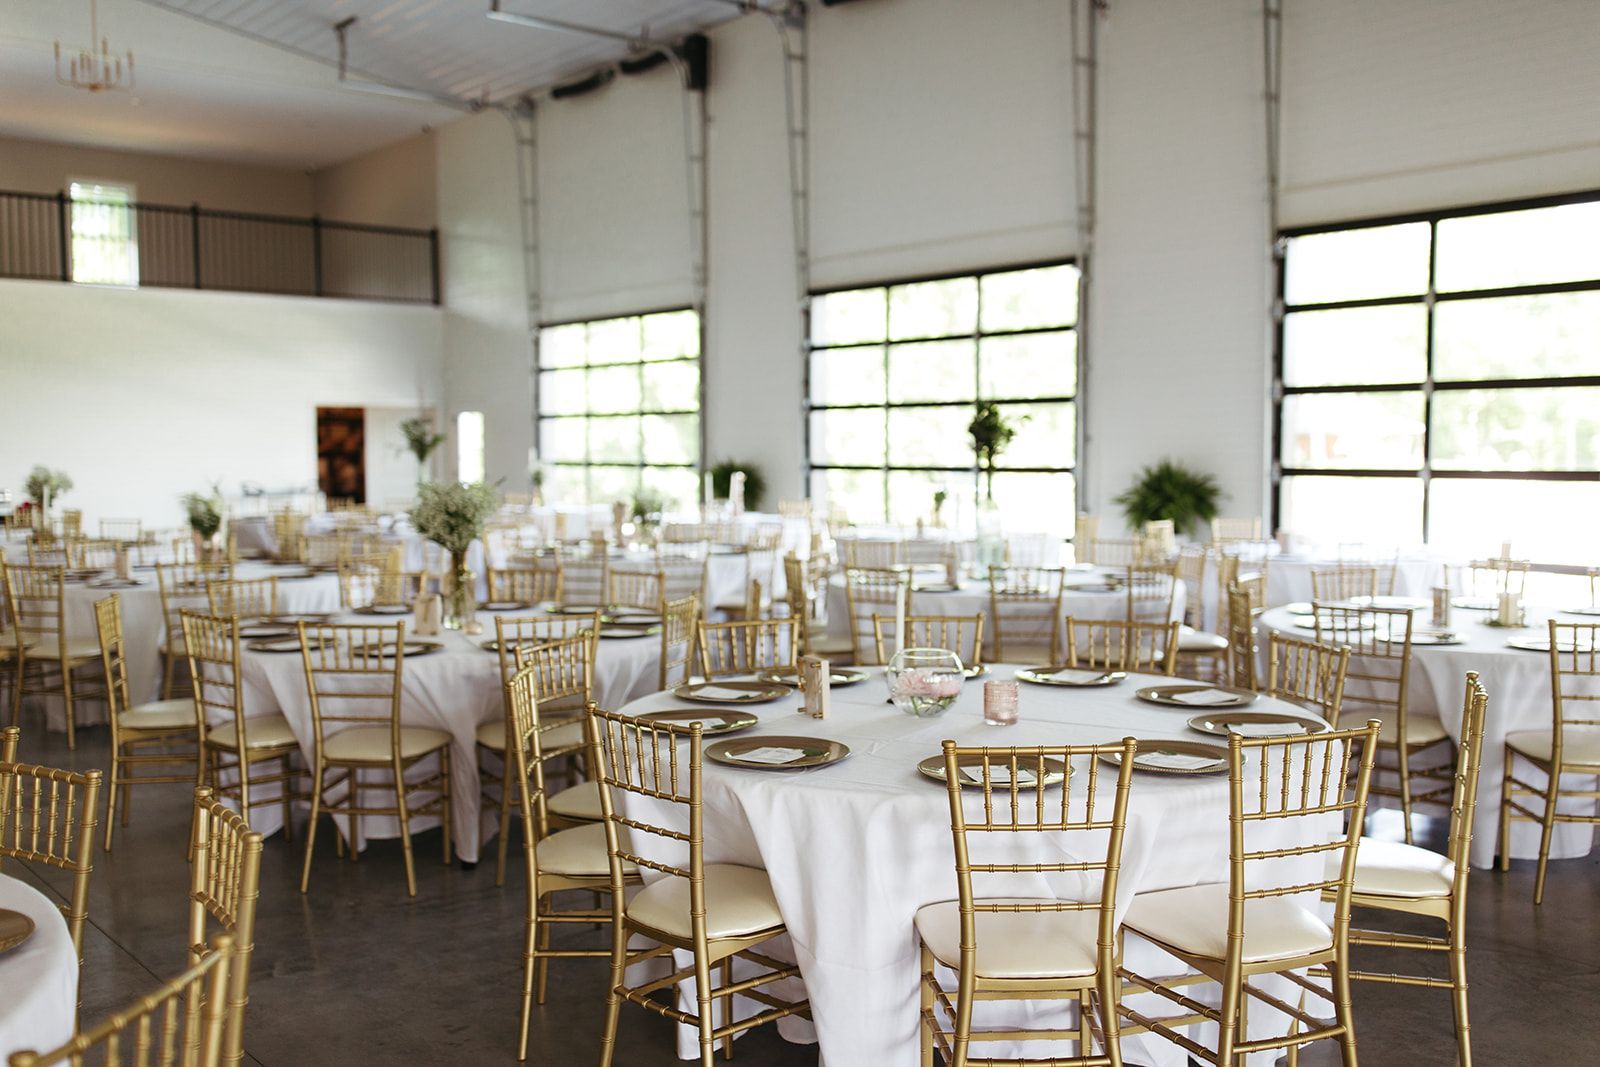 Our Wedding Barn Is Your Blank Canvas for Your Rustic, Glam, or Modern Wedding. Book a Walkthrough.